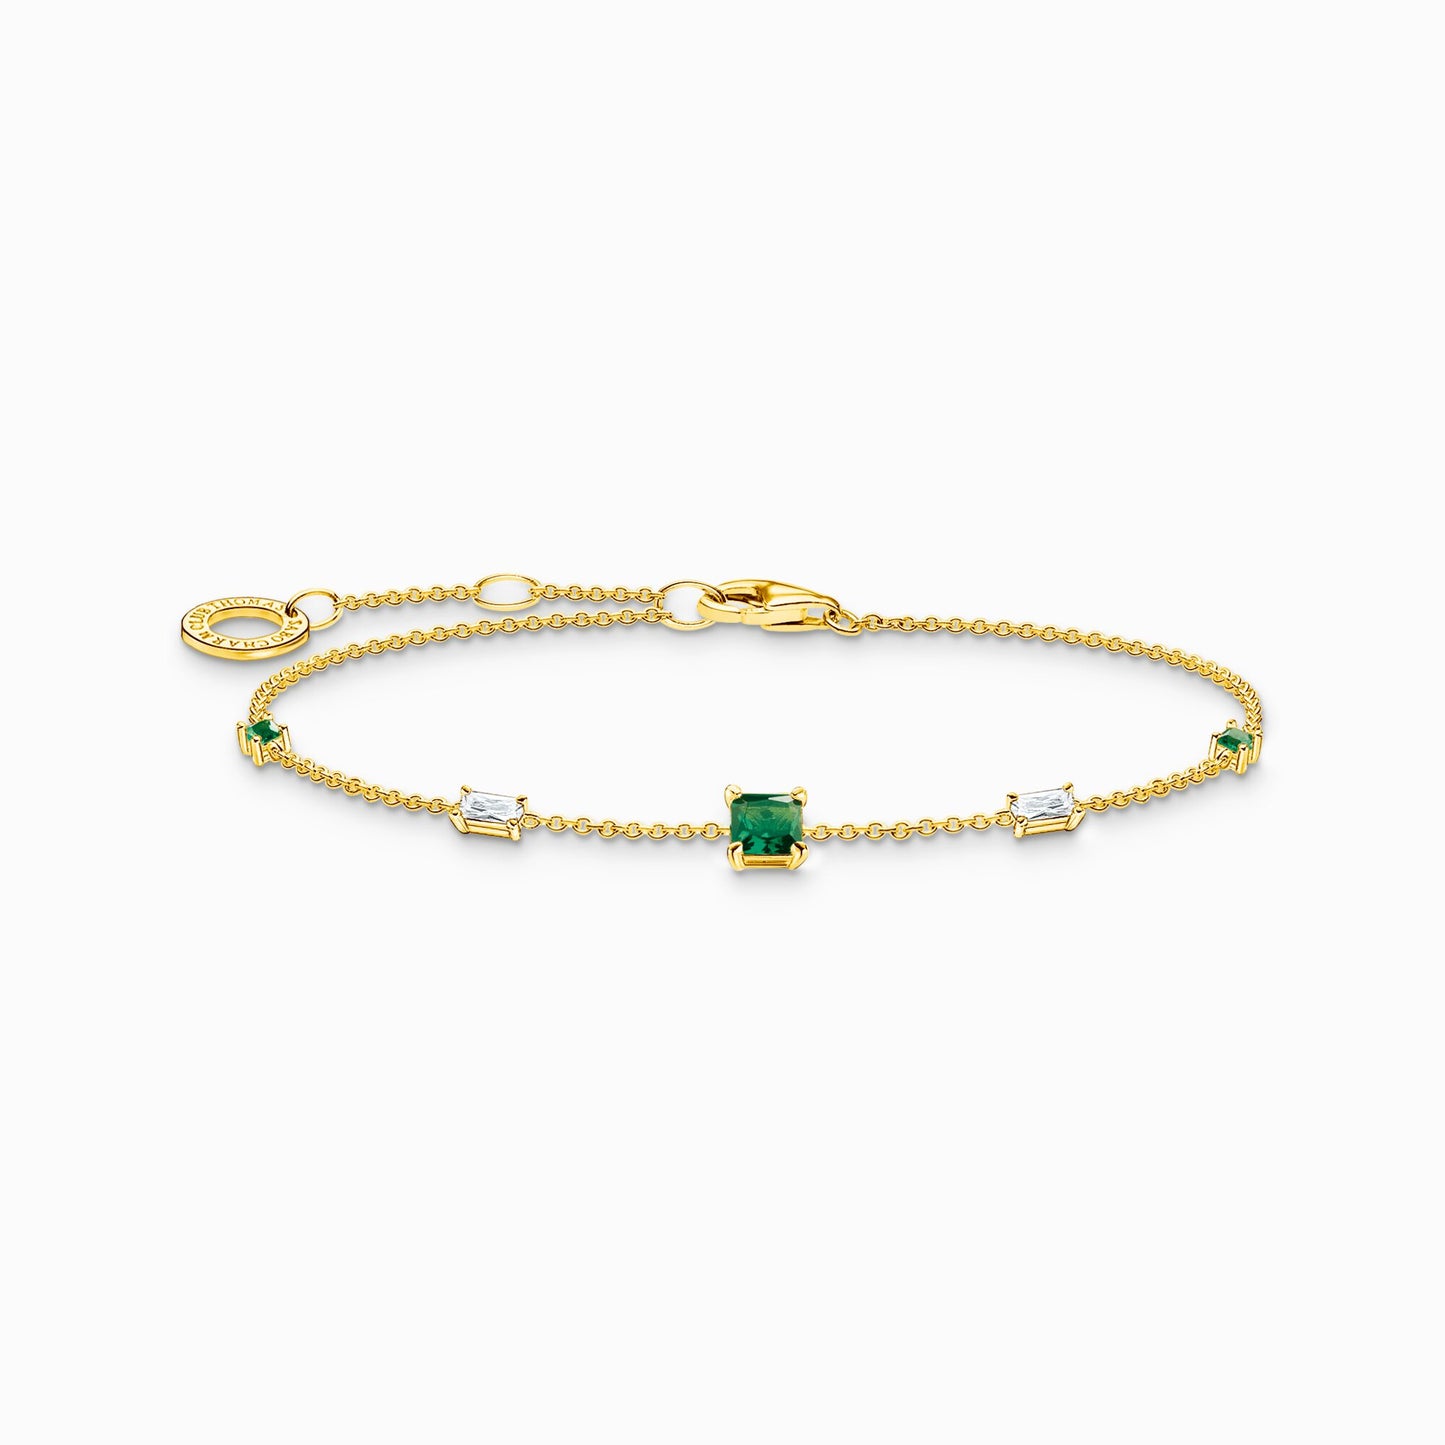 Bracelet with green and white stones 18k gold plated